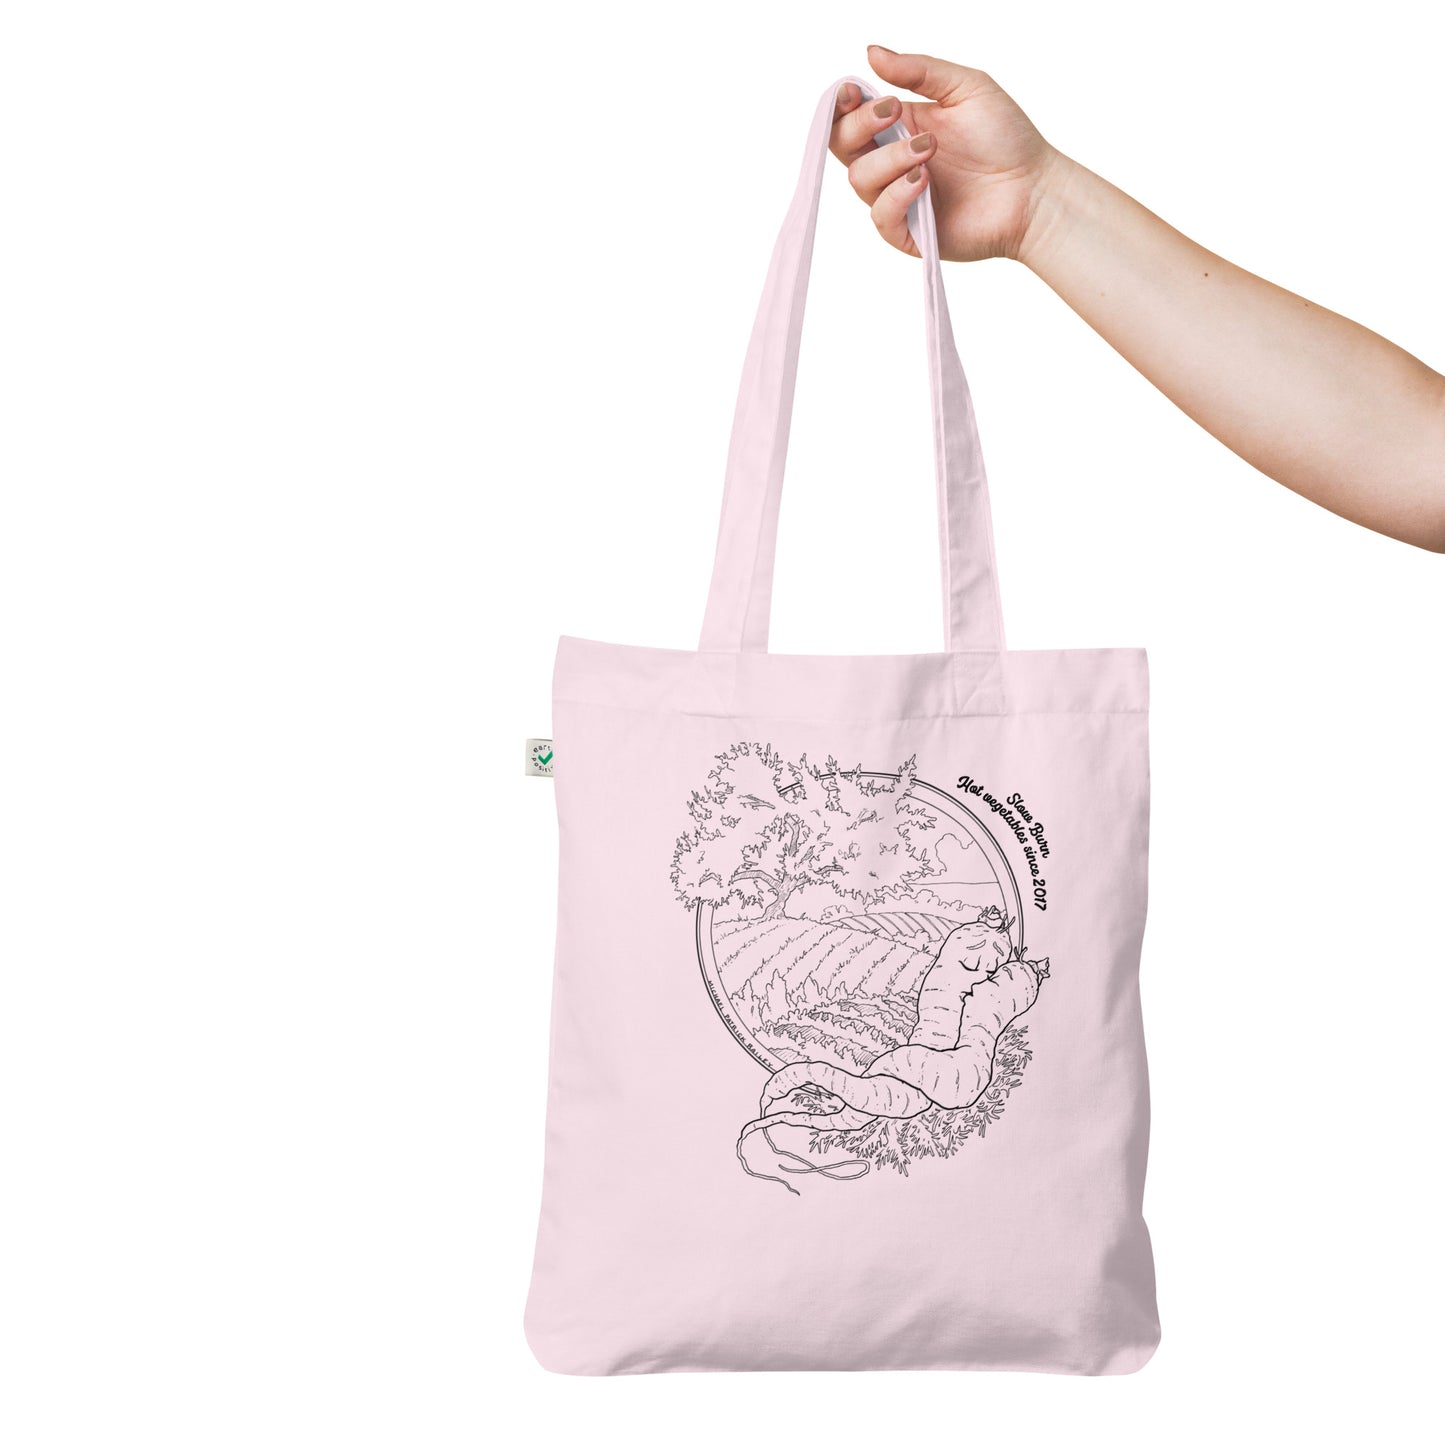 Organic Hot Vegetables Tote